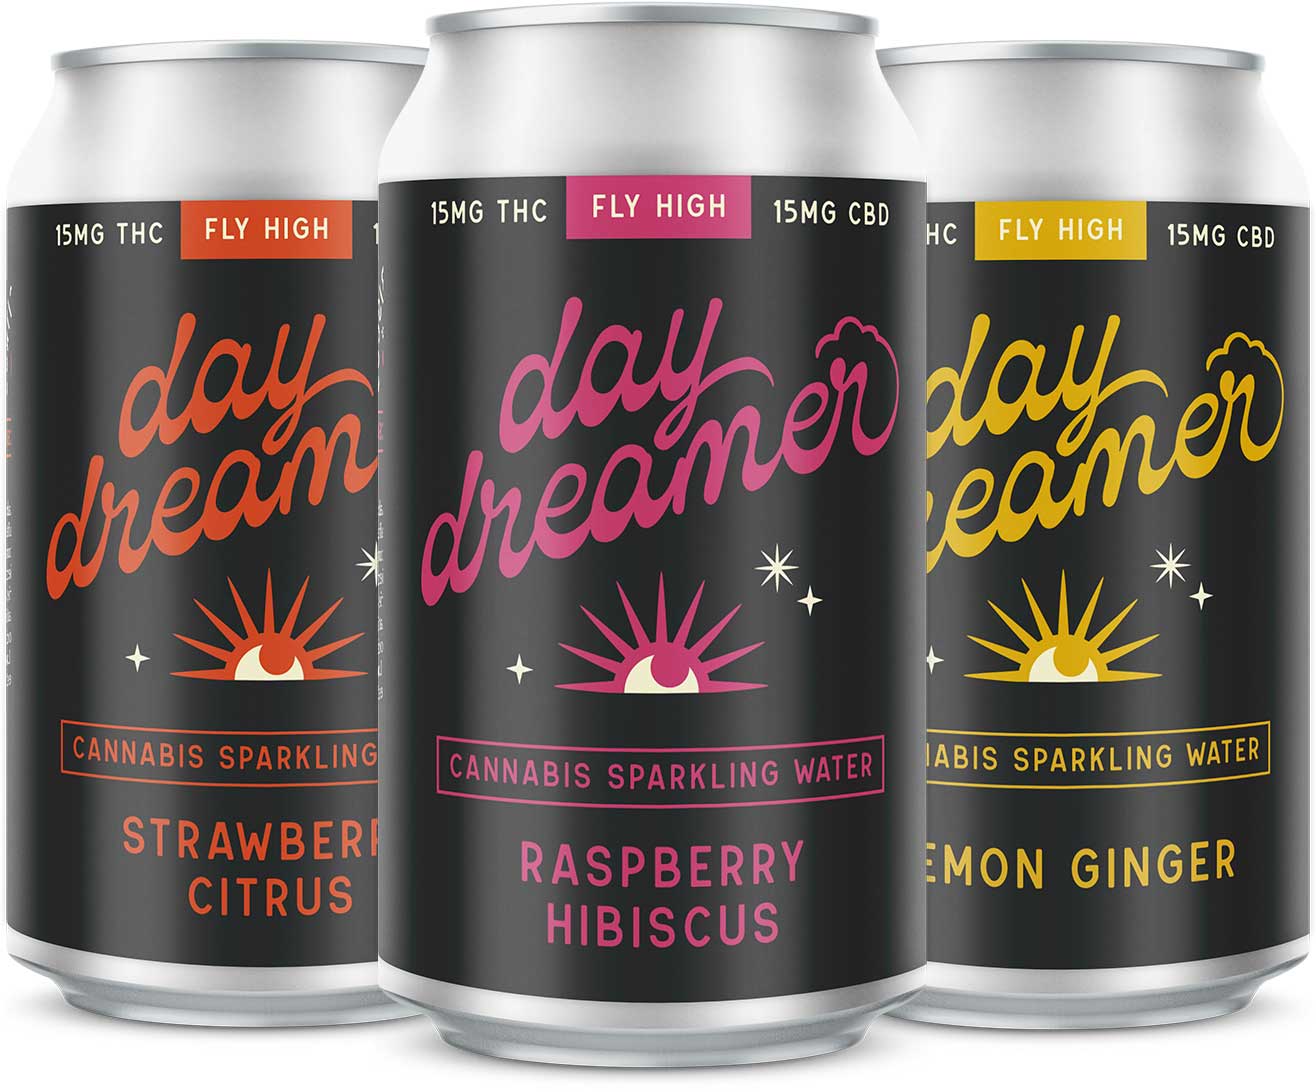 Day Dreamer Cannabis Sparkling Water Cans